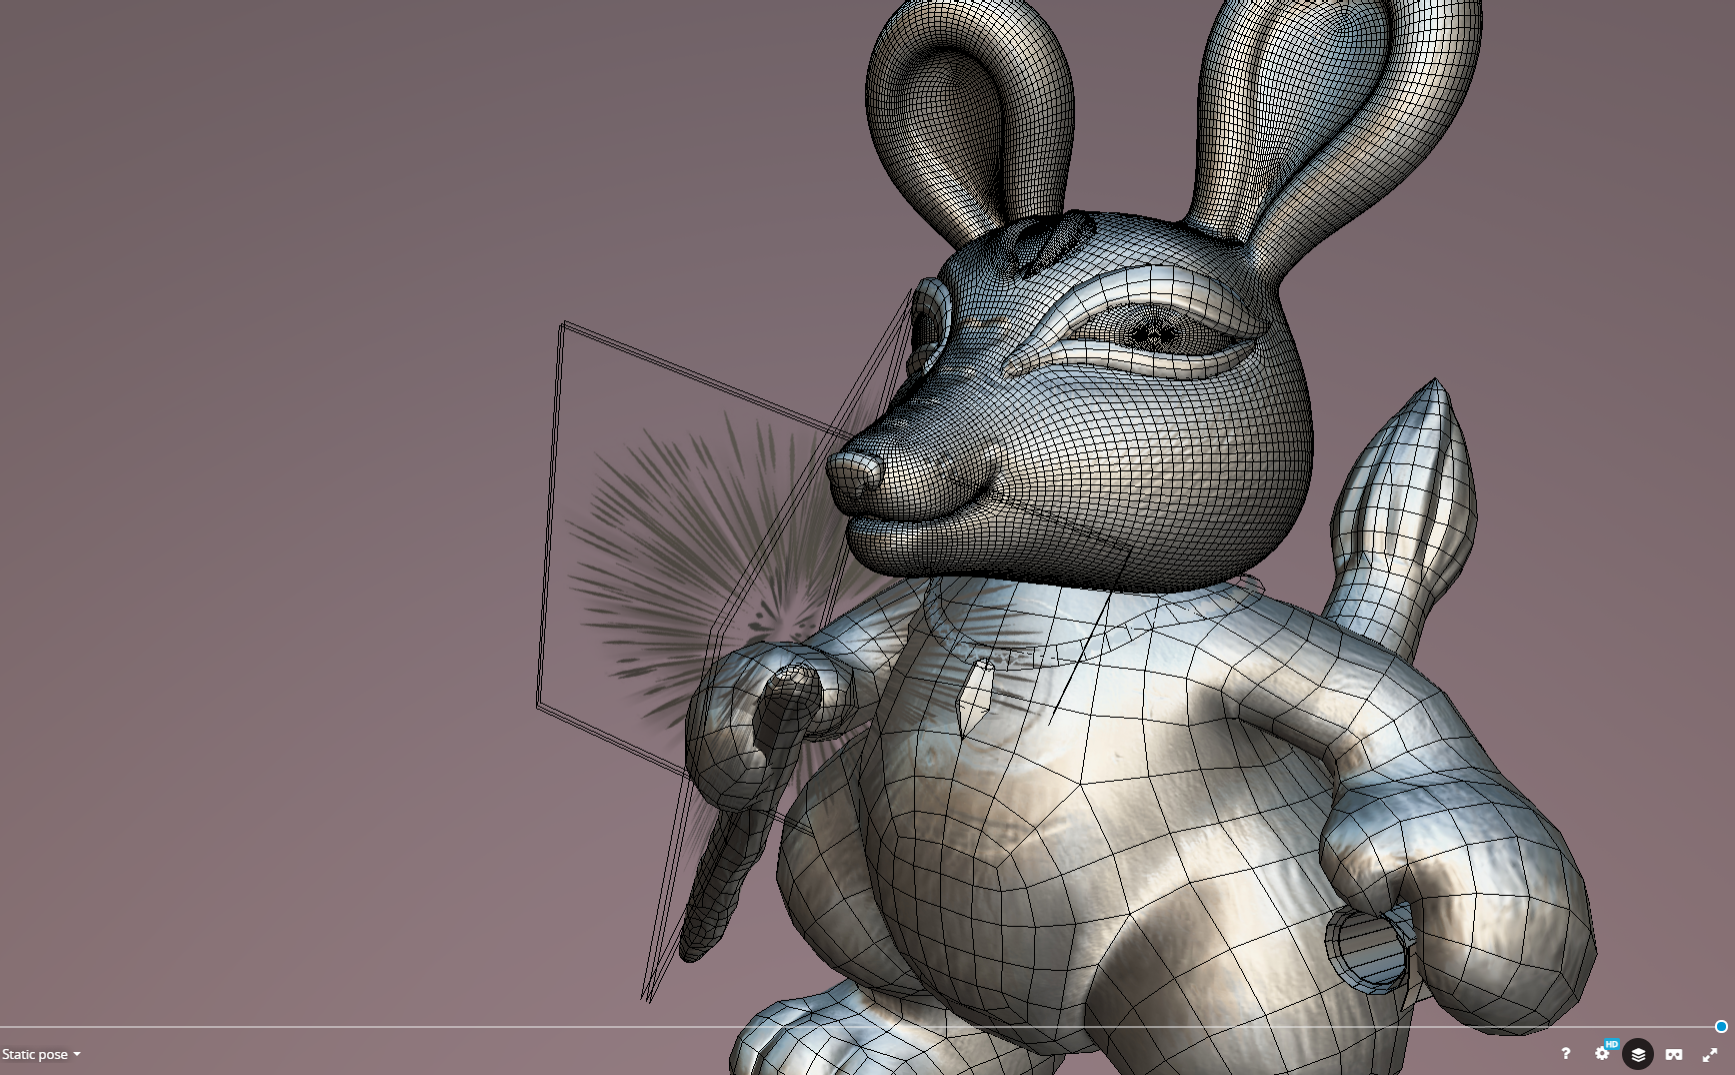 Bunny_matcap_wire.png